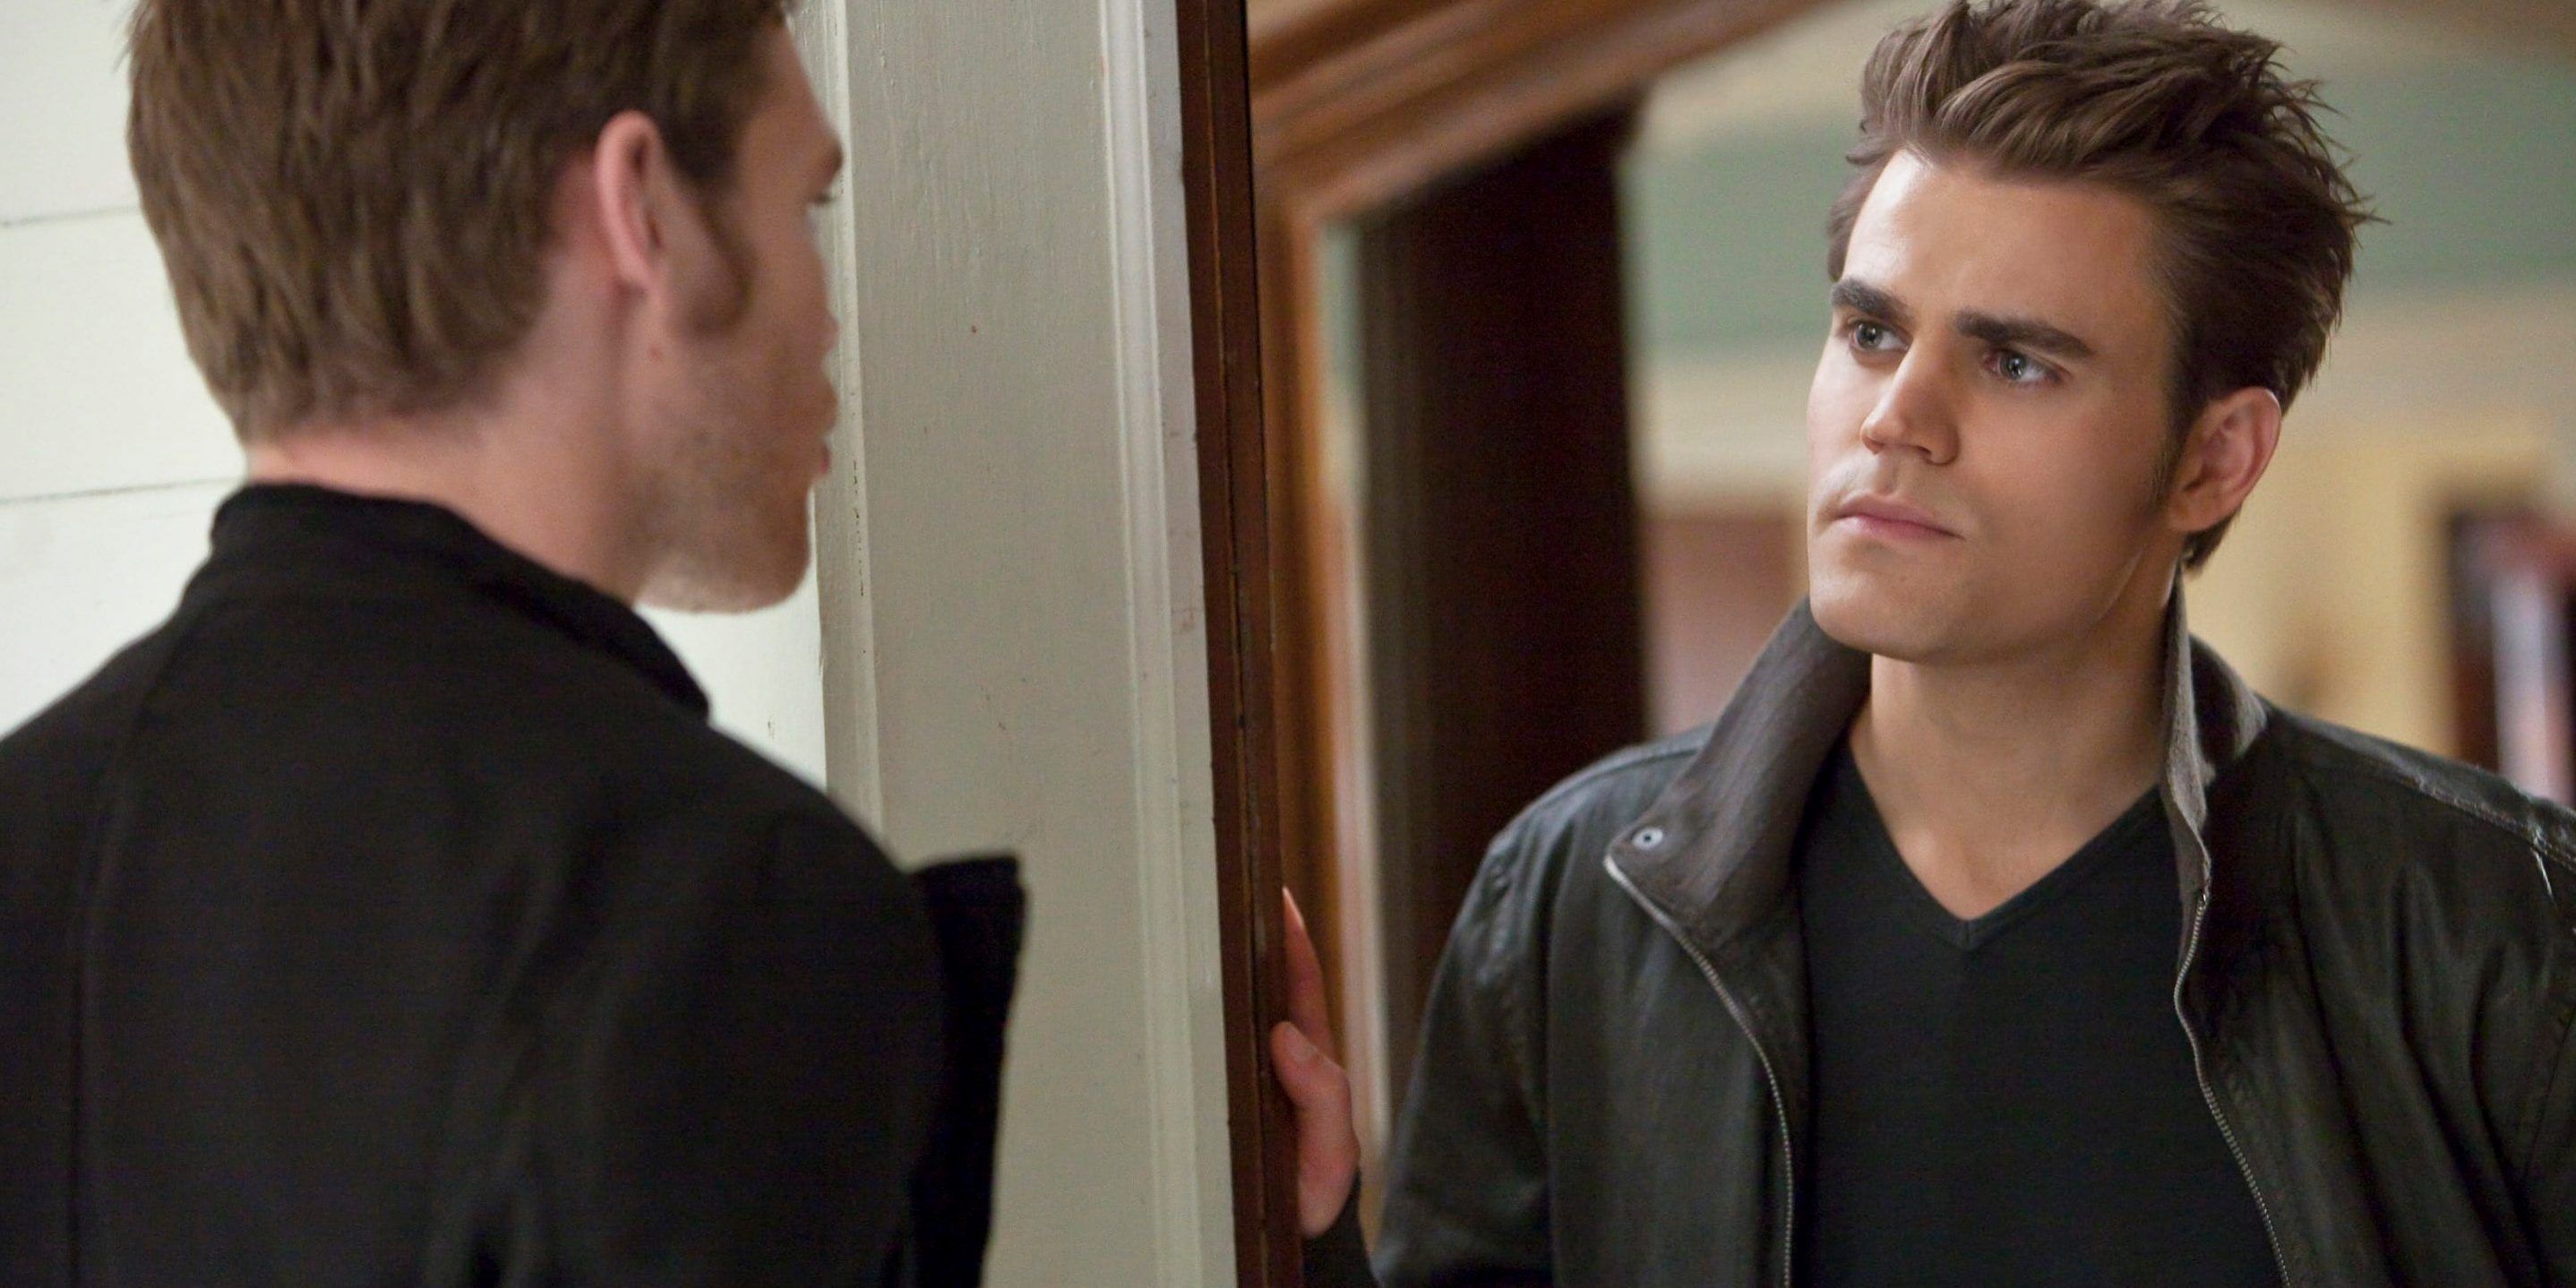 The Vampire Diaries 5 Times Klaus Was The Biggest Bad Guy In Mystic Falls (& 5 Times It Was Katherine)